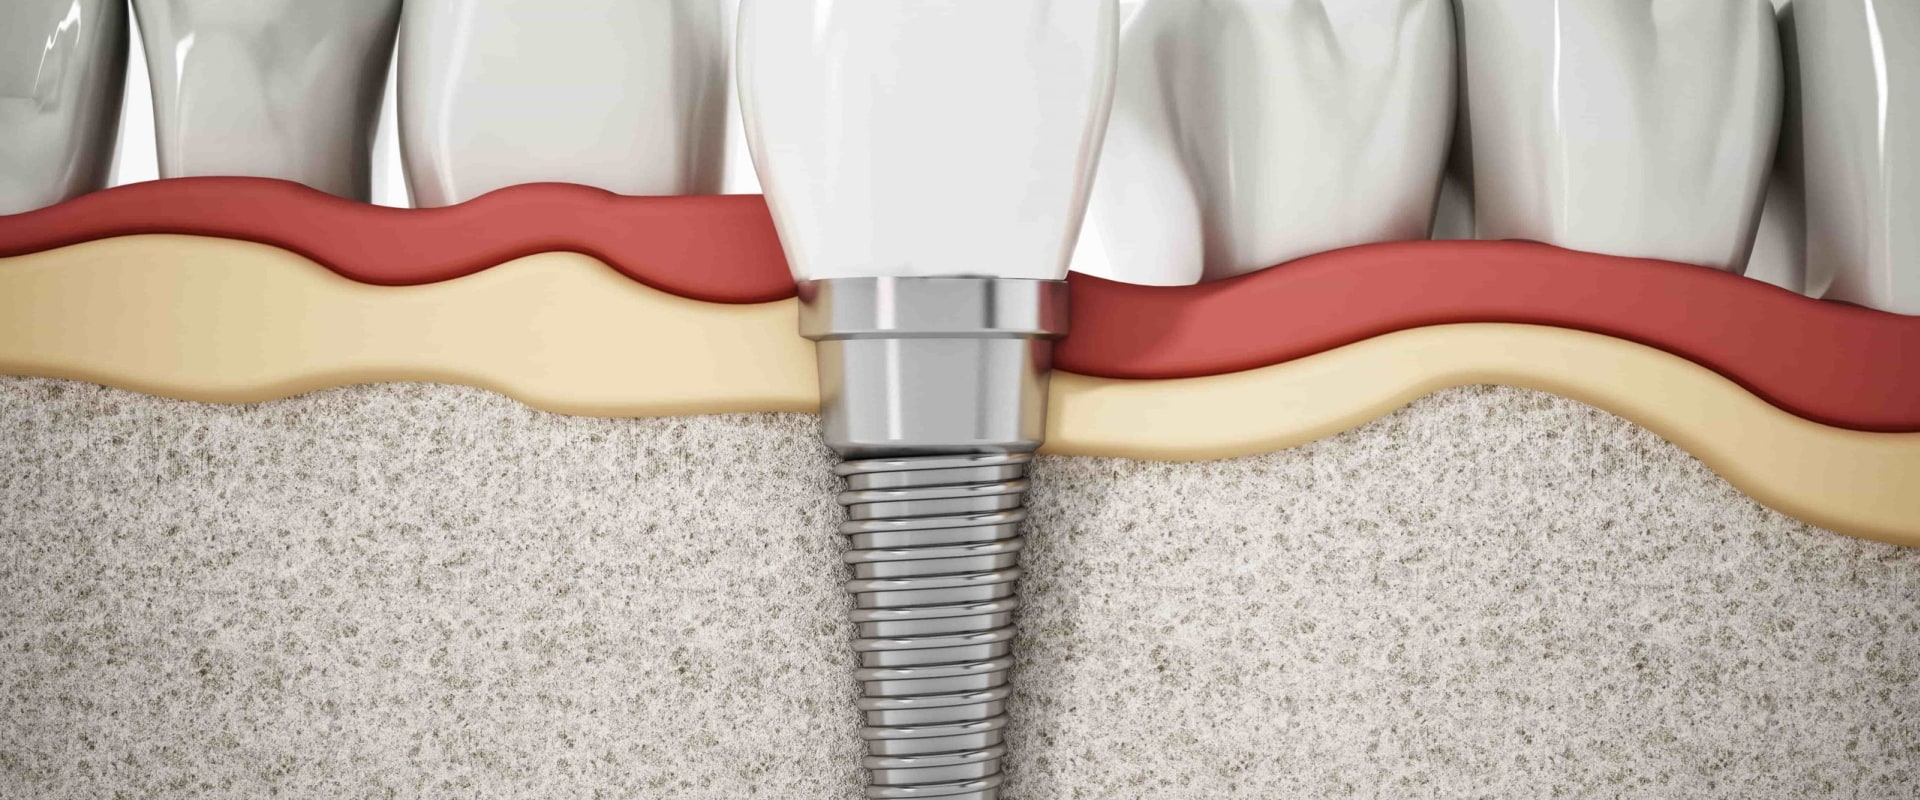 Do Dental Implants Ever Need to be Replaced?